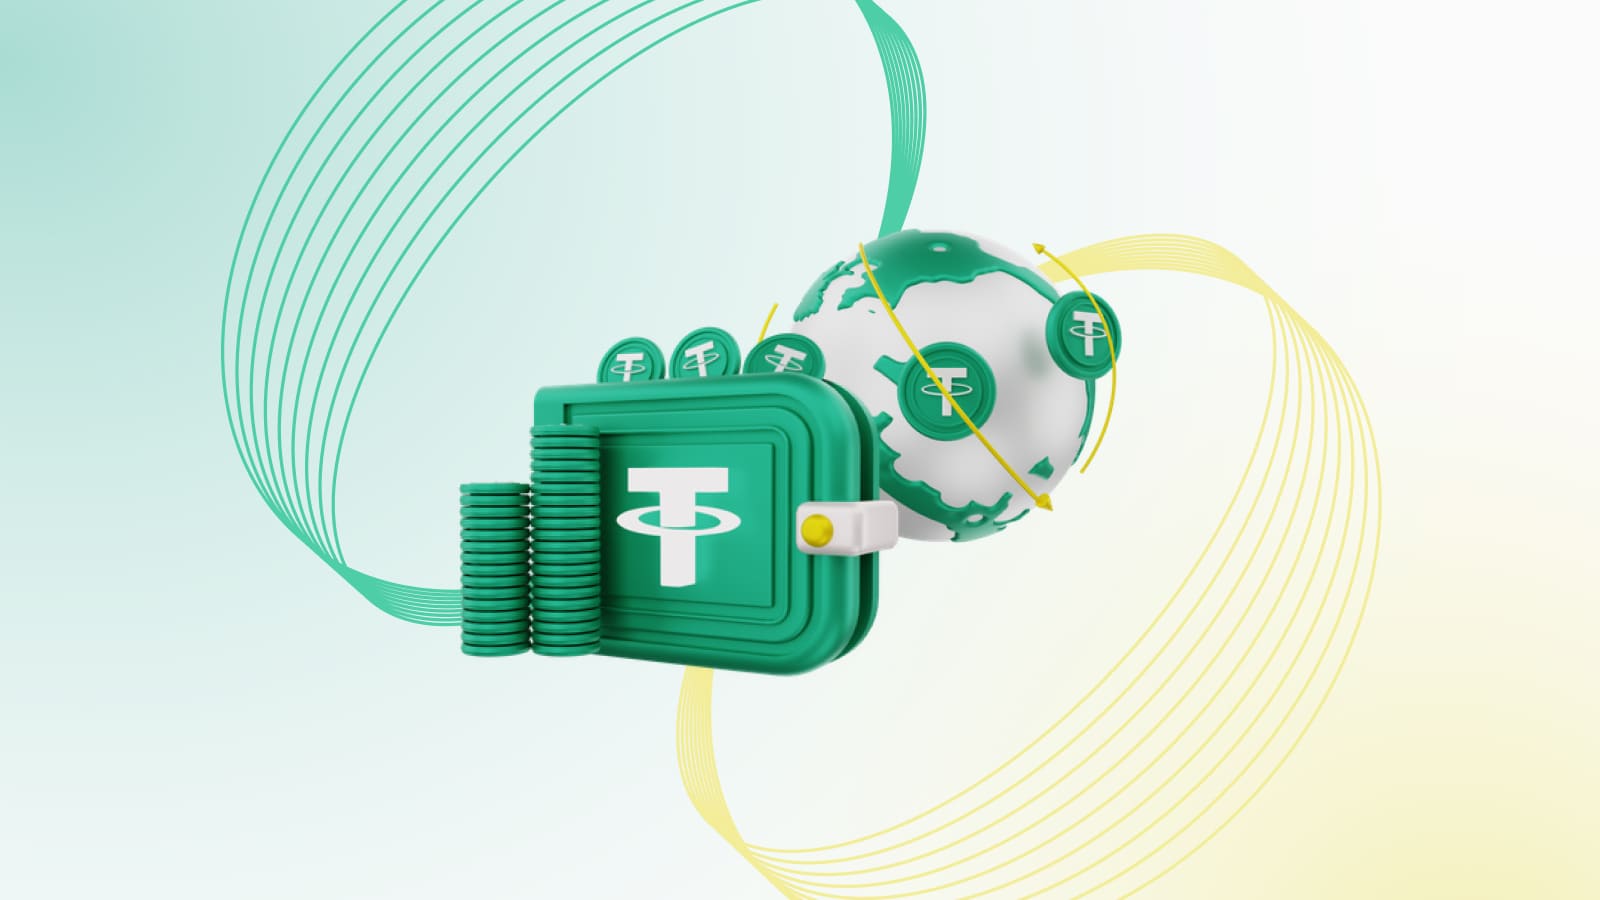 Tether's stability, low fees, and innovation make it appealing to investors.